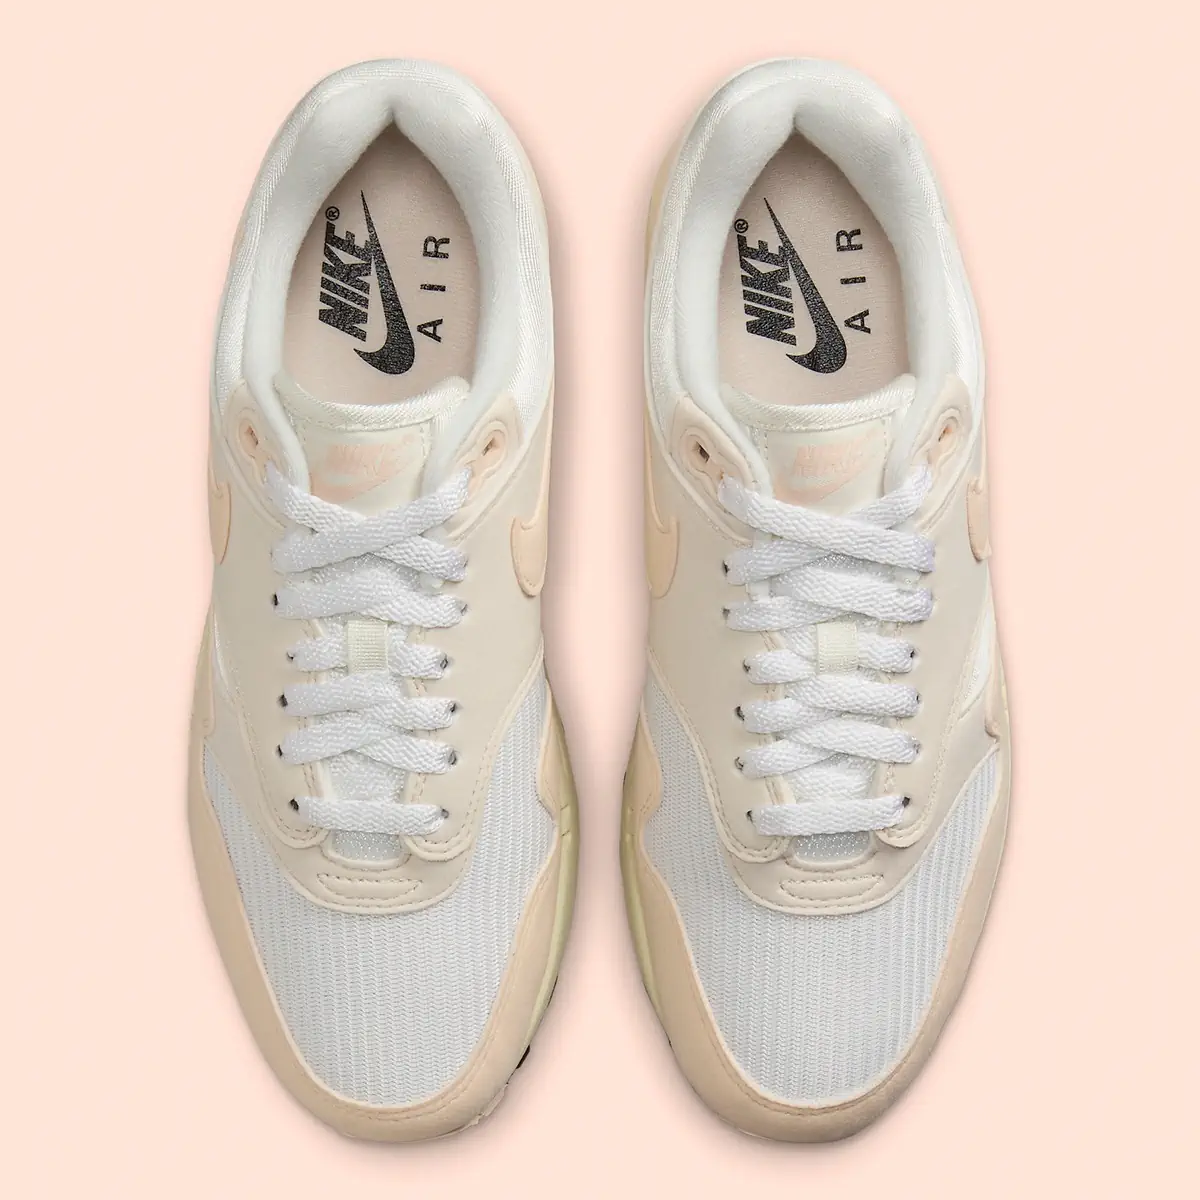 Nike Air Max 1 "Guava Ice" elevates women's sneakers with sophisticated pastels